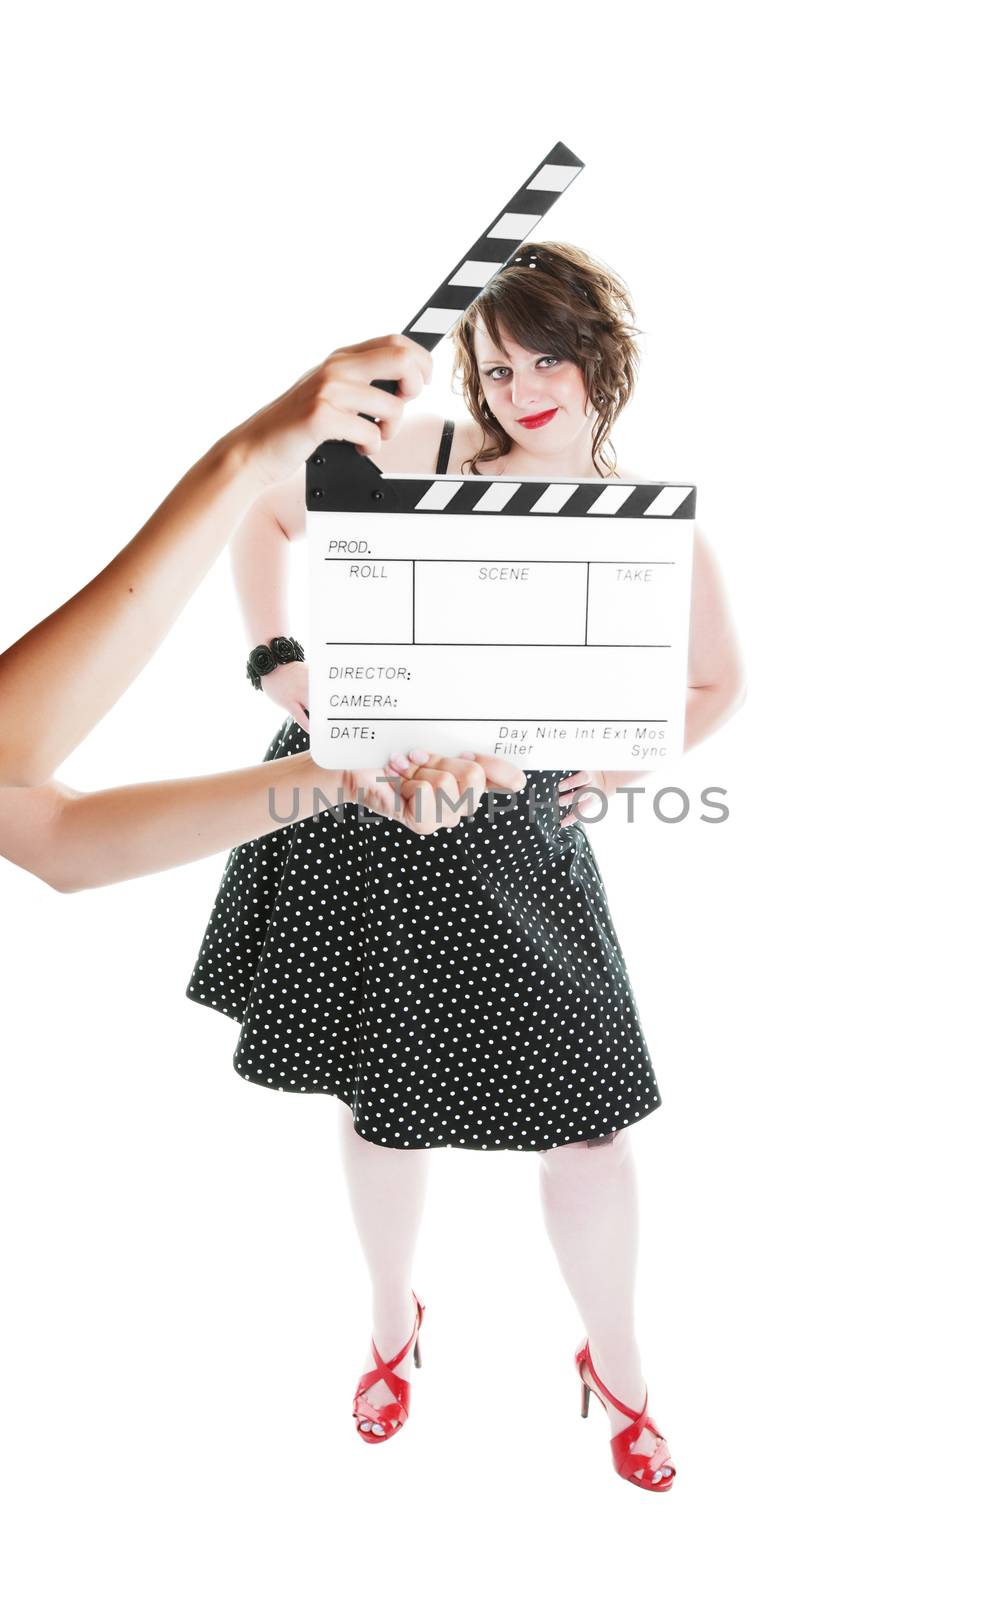 A clapper board being held up in front of a young actress dressed in pinup fashion.  Shot on white background.  Focus on actress.